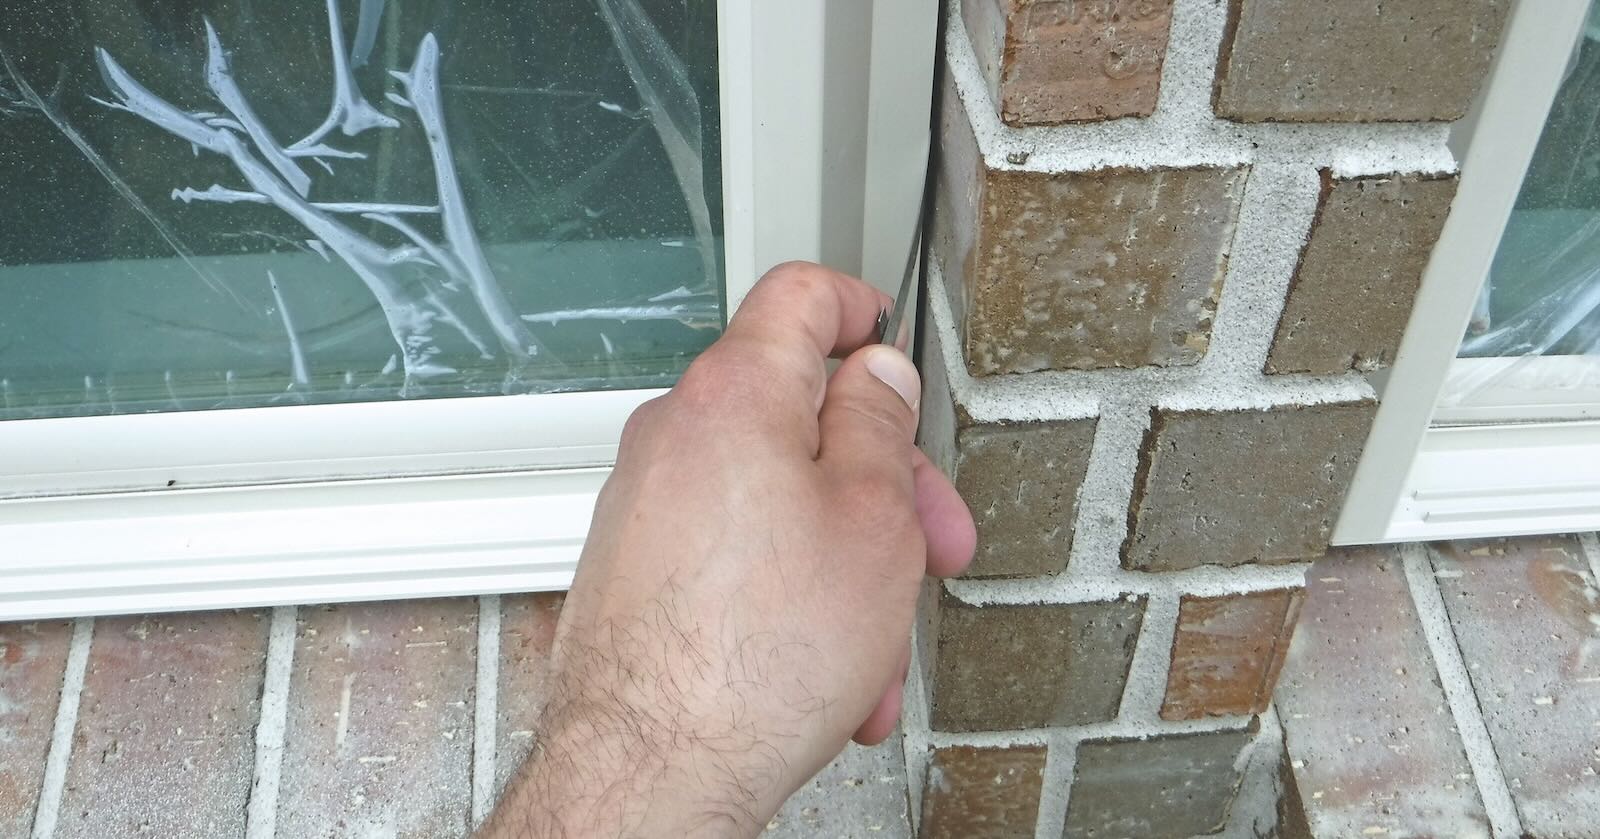 How To Seal Gap Between Window And Brick Wall